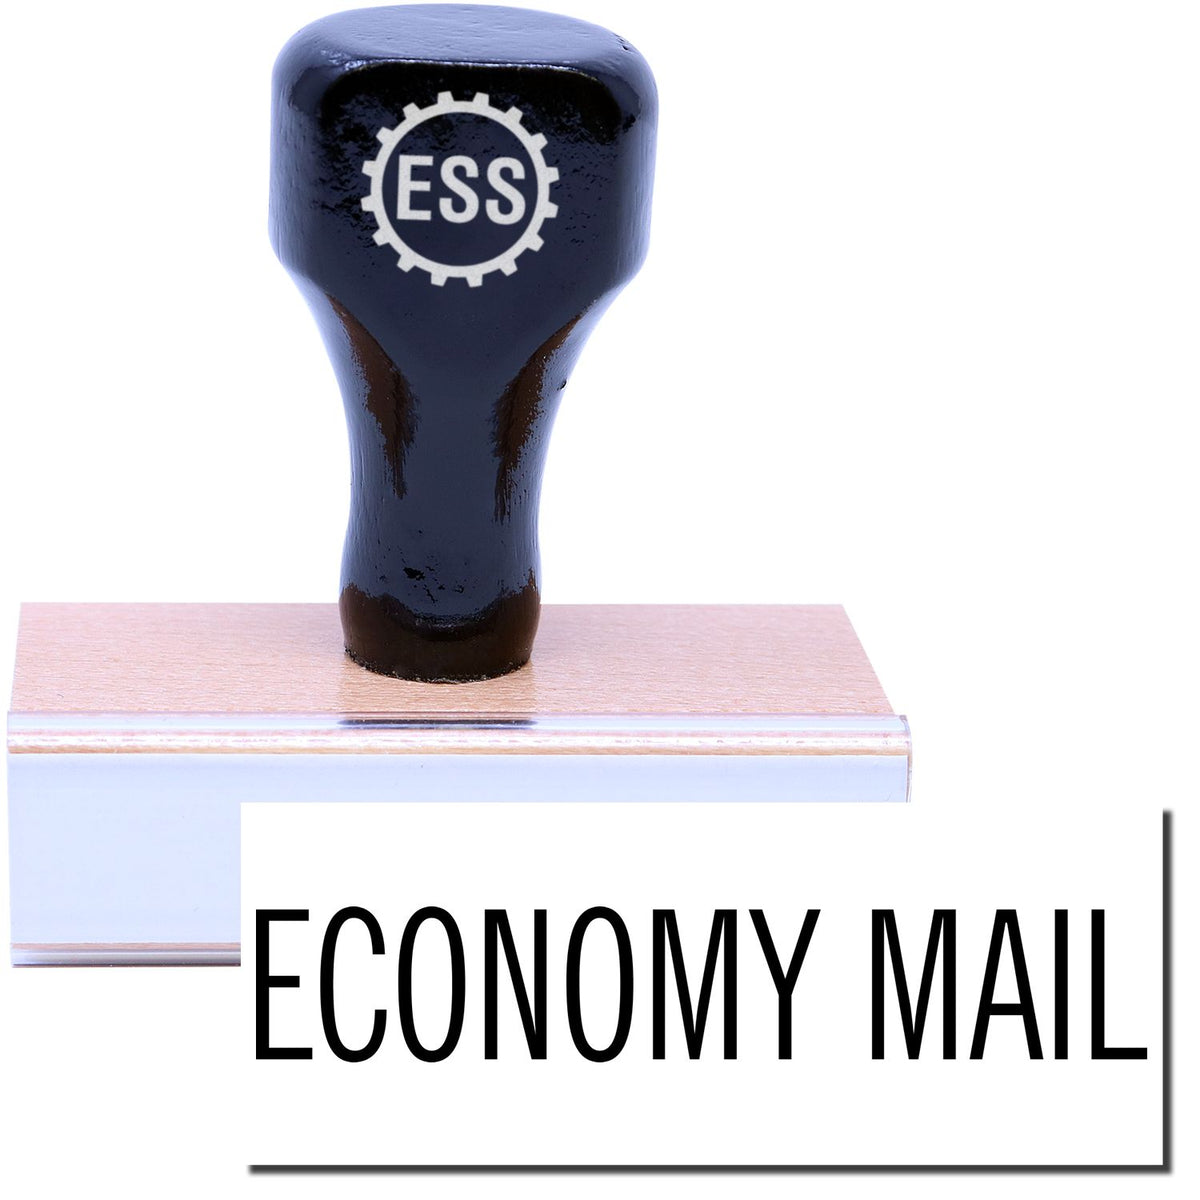 A stock office rubber stamp with a stamped image showing how the text &quot;ECONOMY MAIL&quot; in a large font is displayed after stamping.